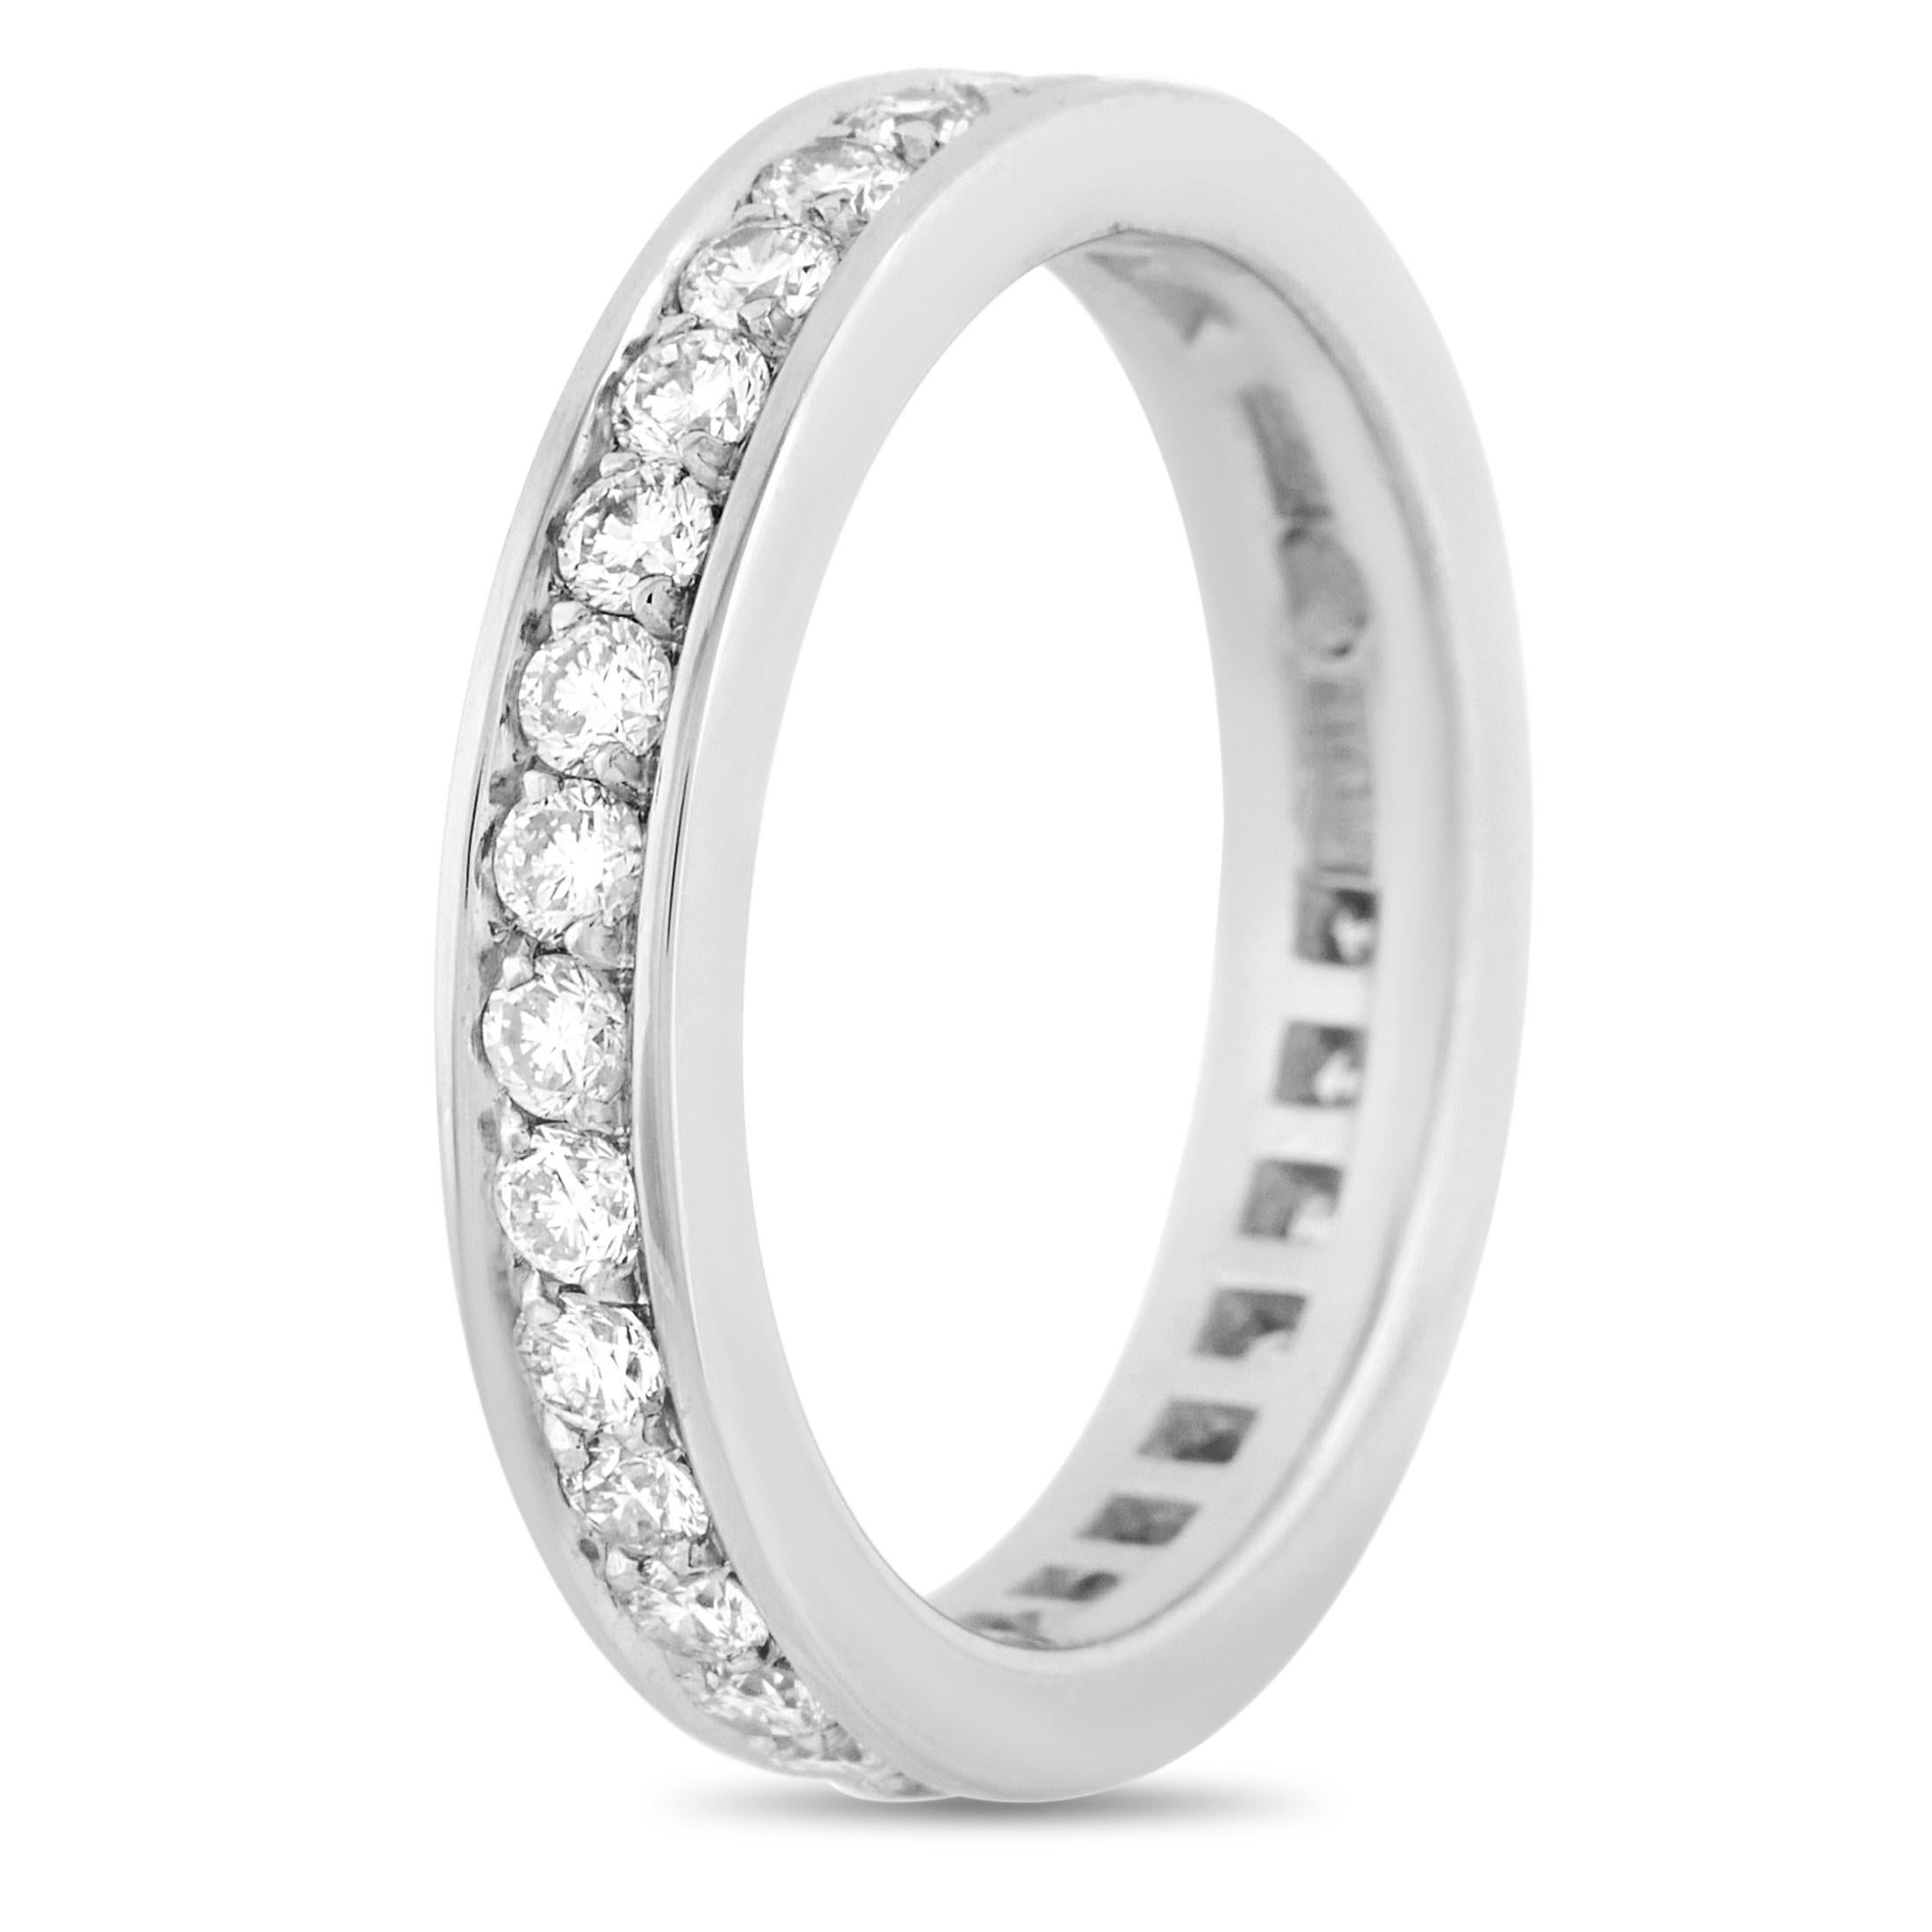 Encircle her finger with the timeless sparkle of this eternity ring from Bvlgari. The 3mm narrow band is decorated with 0.85-carat dazzling diamonds in classic channel setting. There's no better ring to signify your promise of everlasting love than